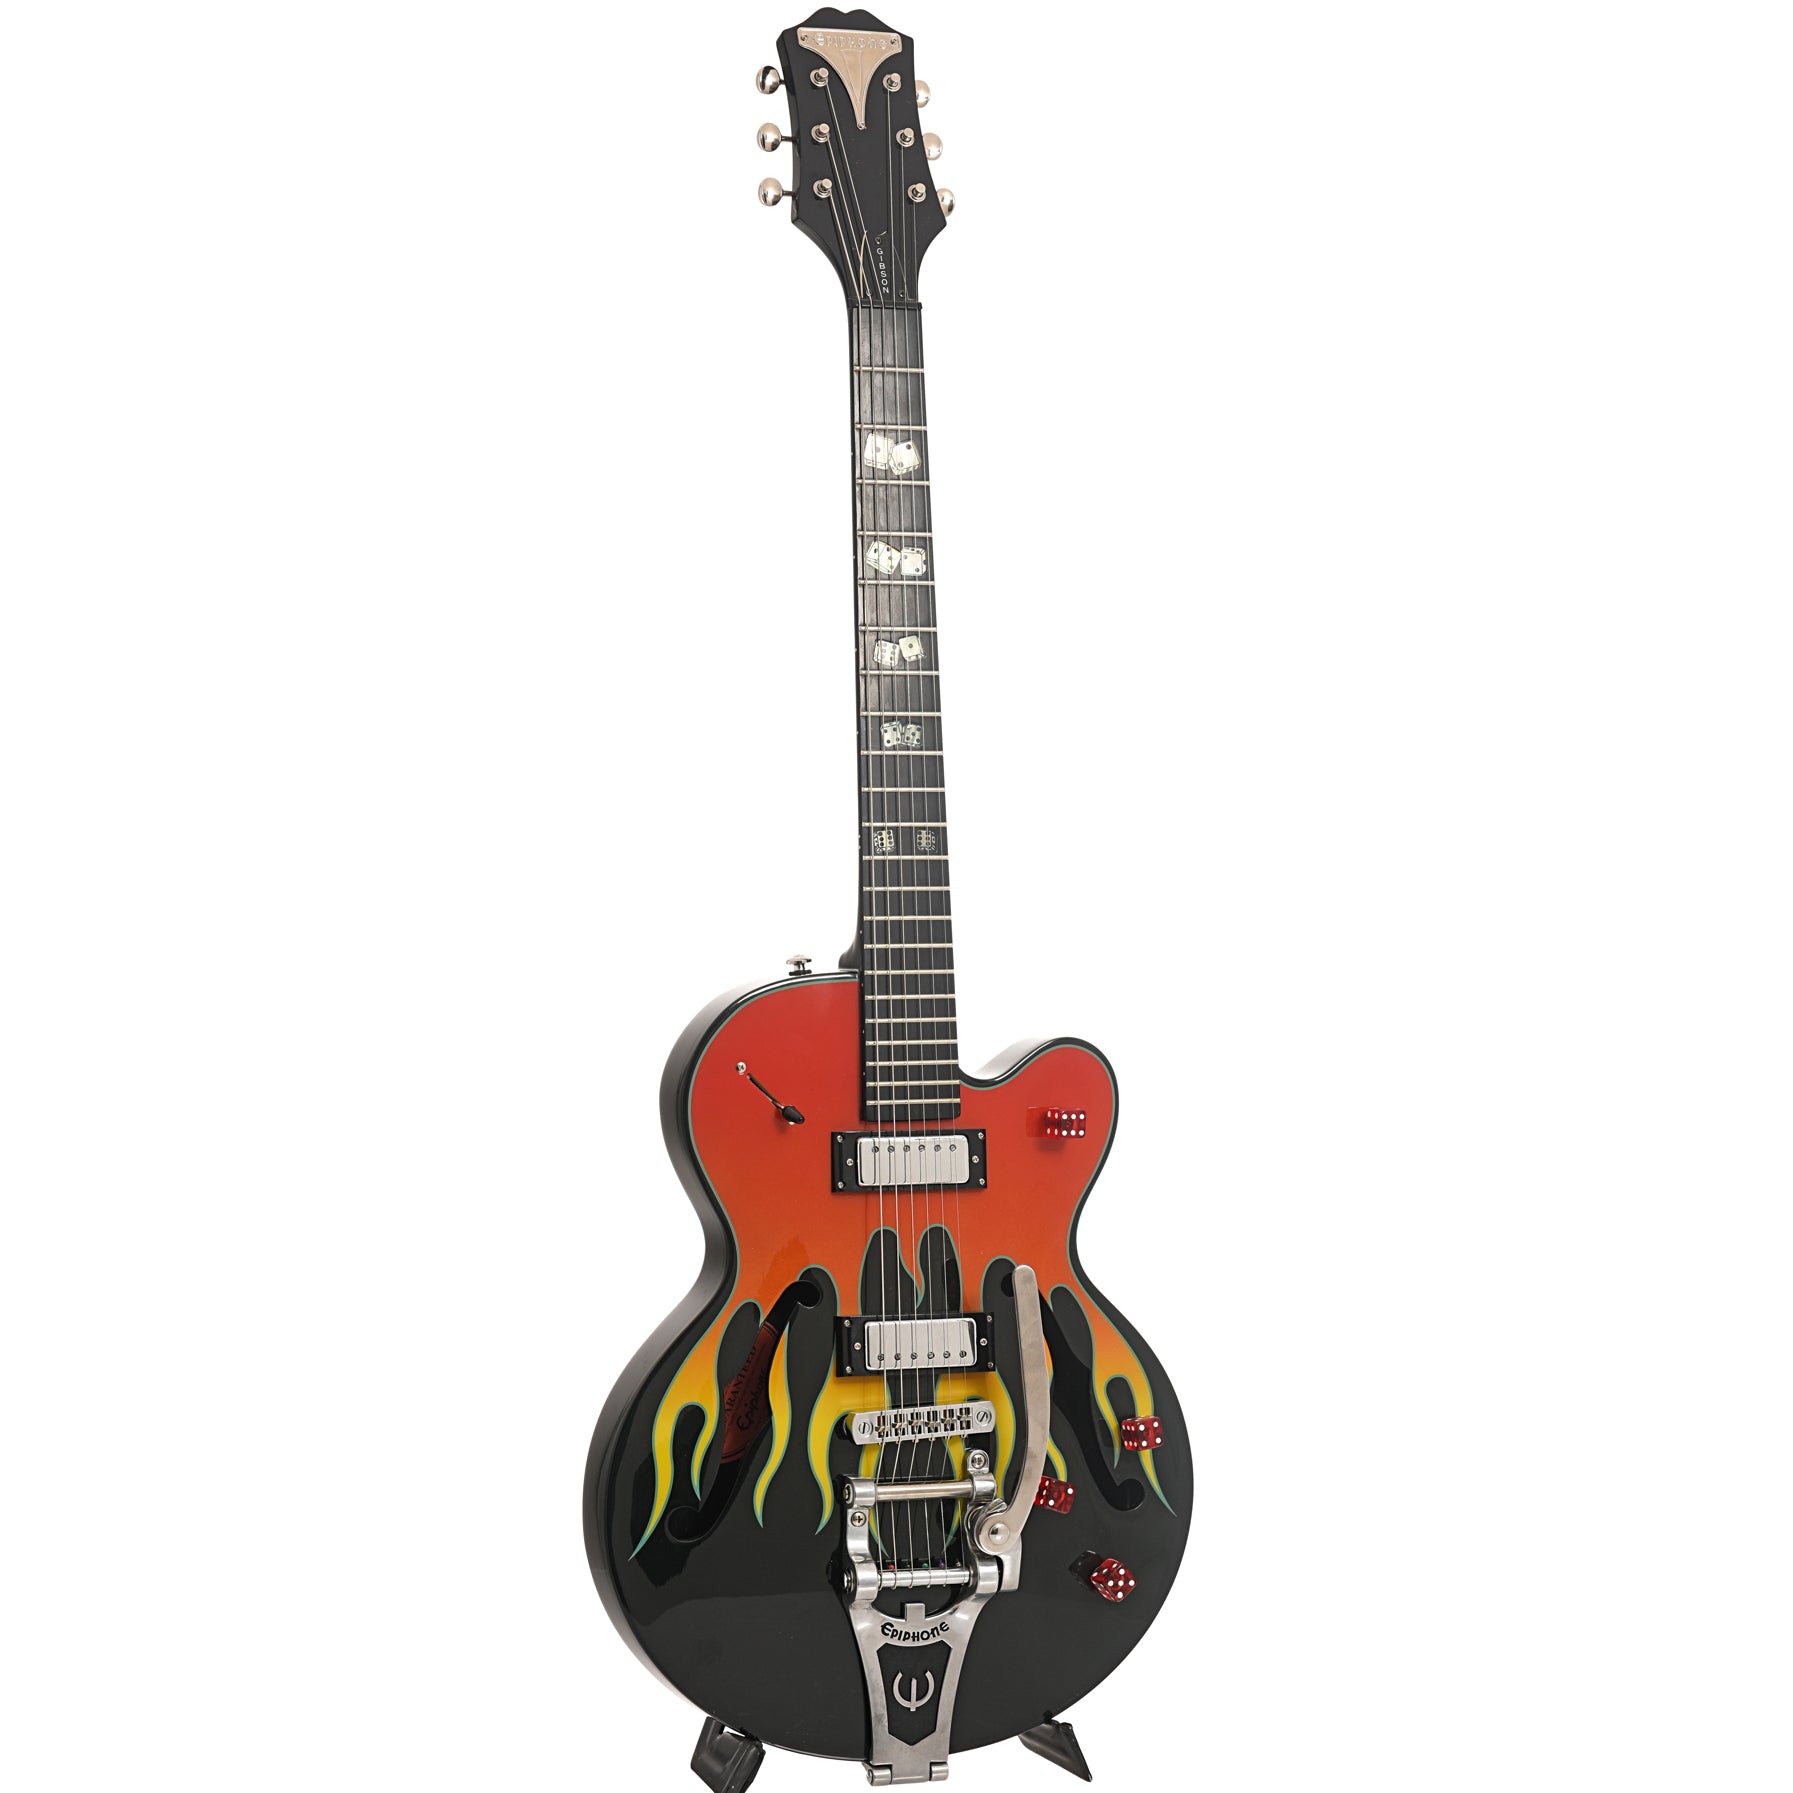 Full front and side of Epiphone Flamekat